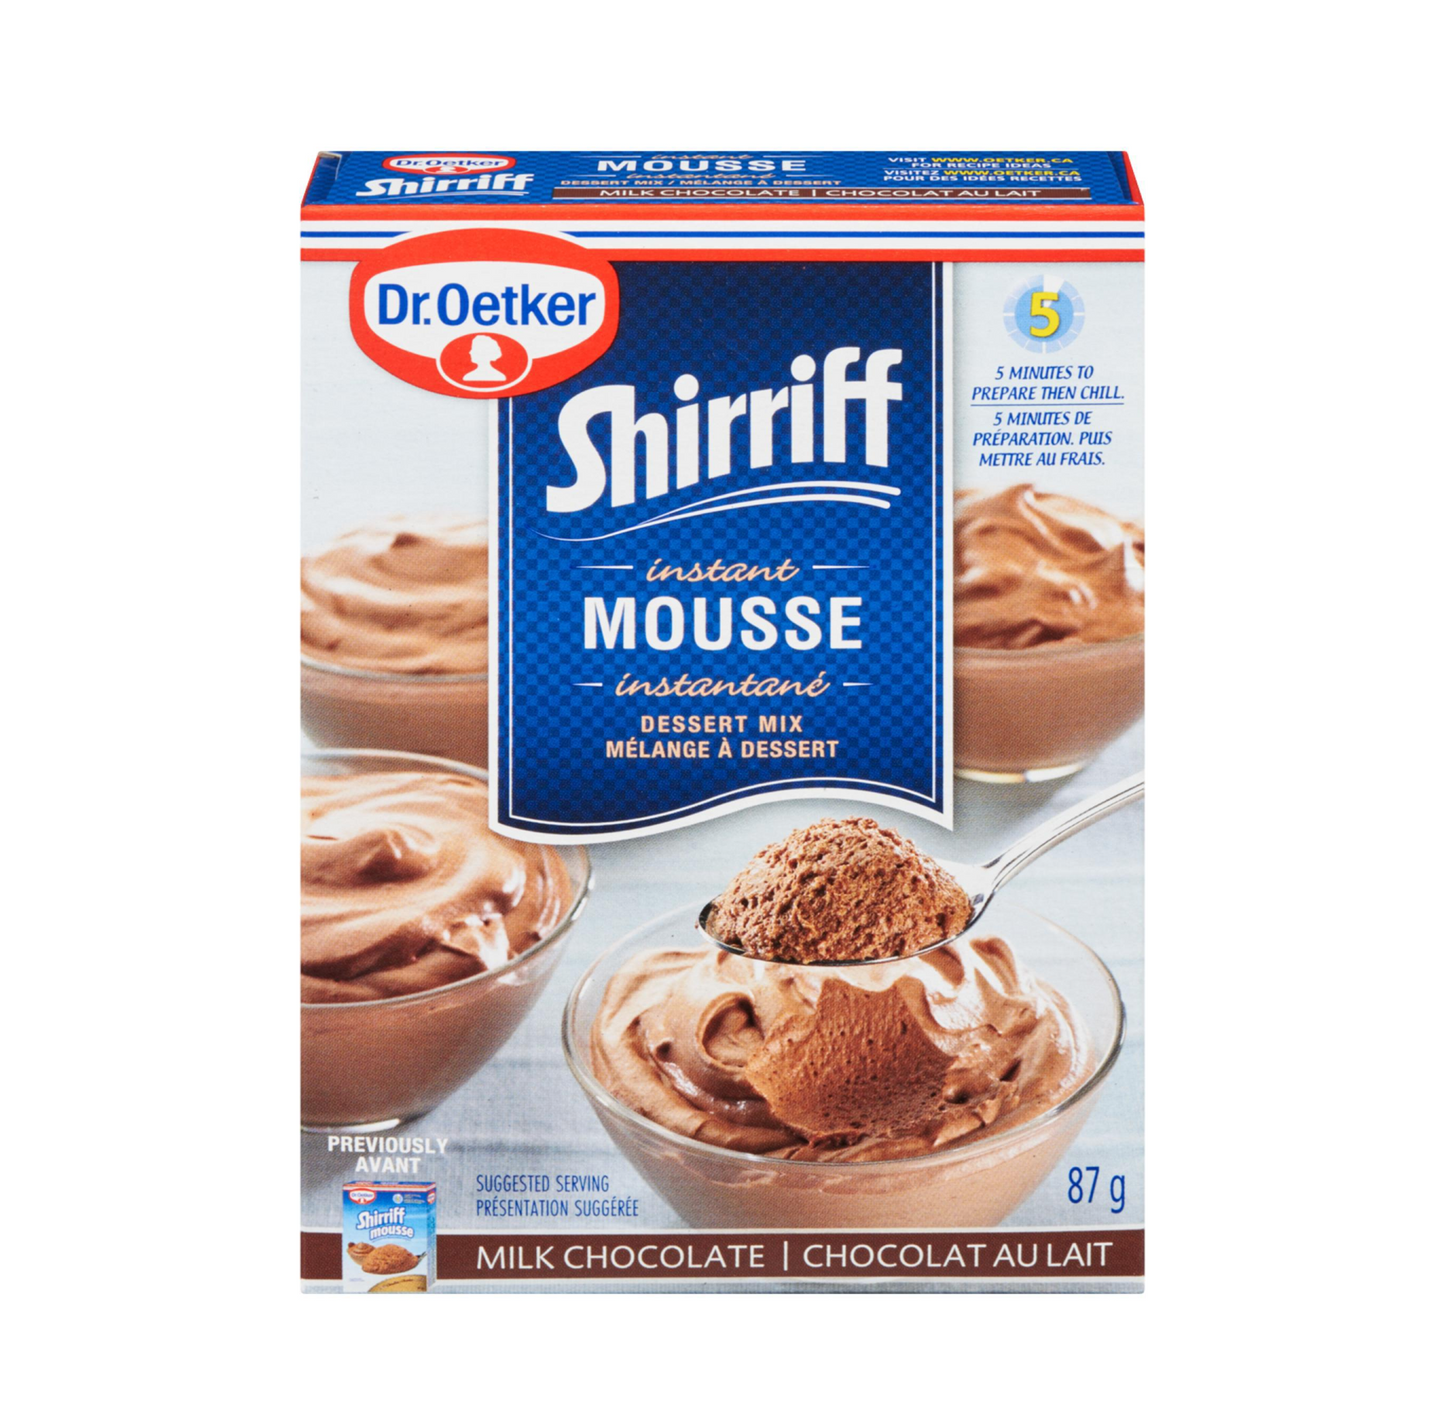 Dr. Oetker Shirriff Chocolate Instant Mousse Mix 87g